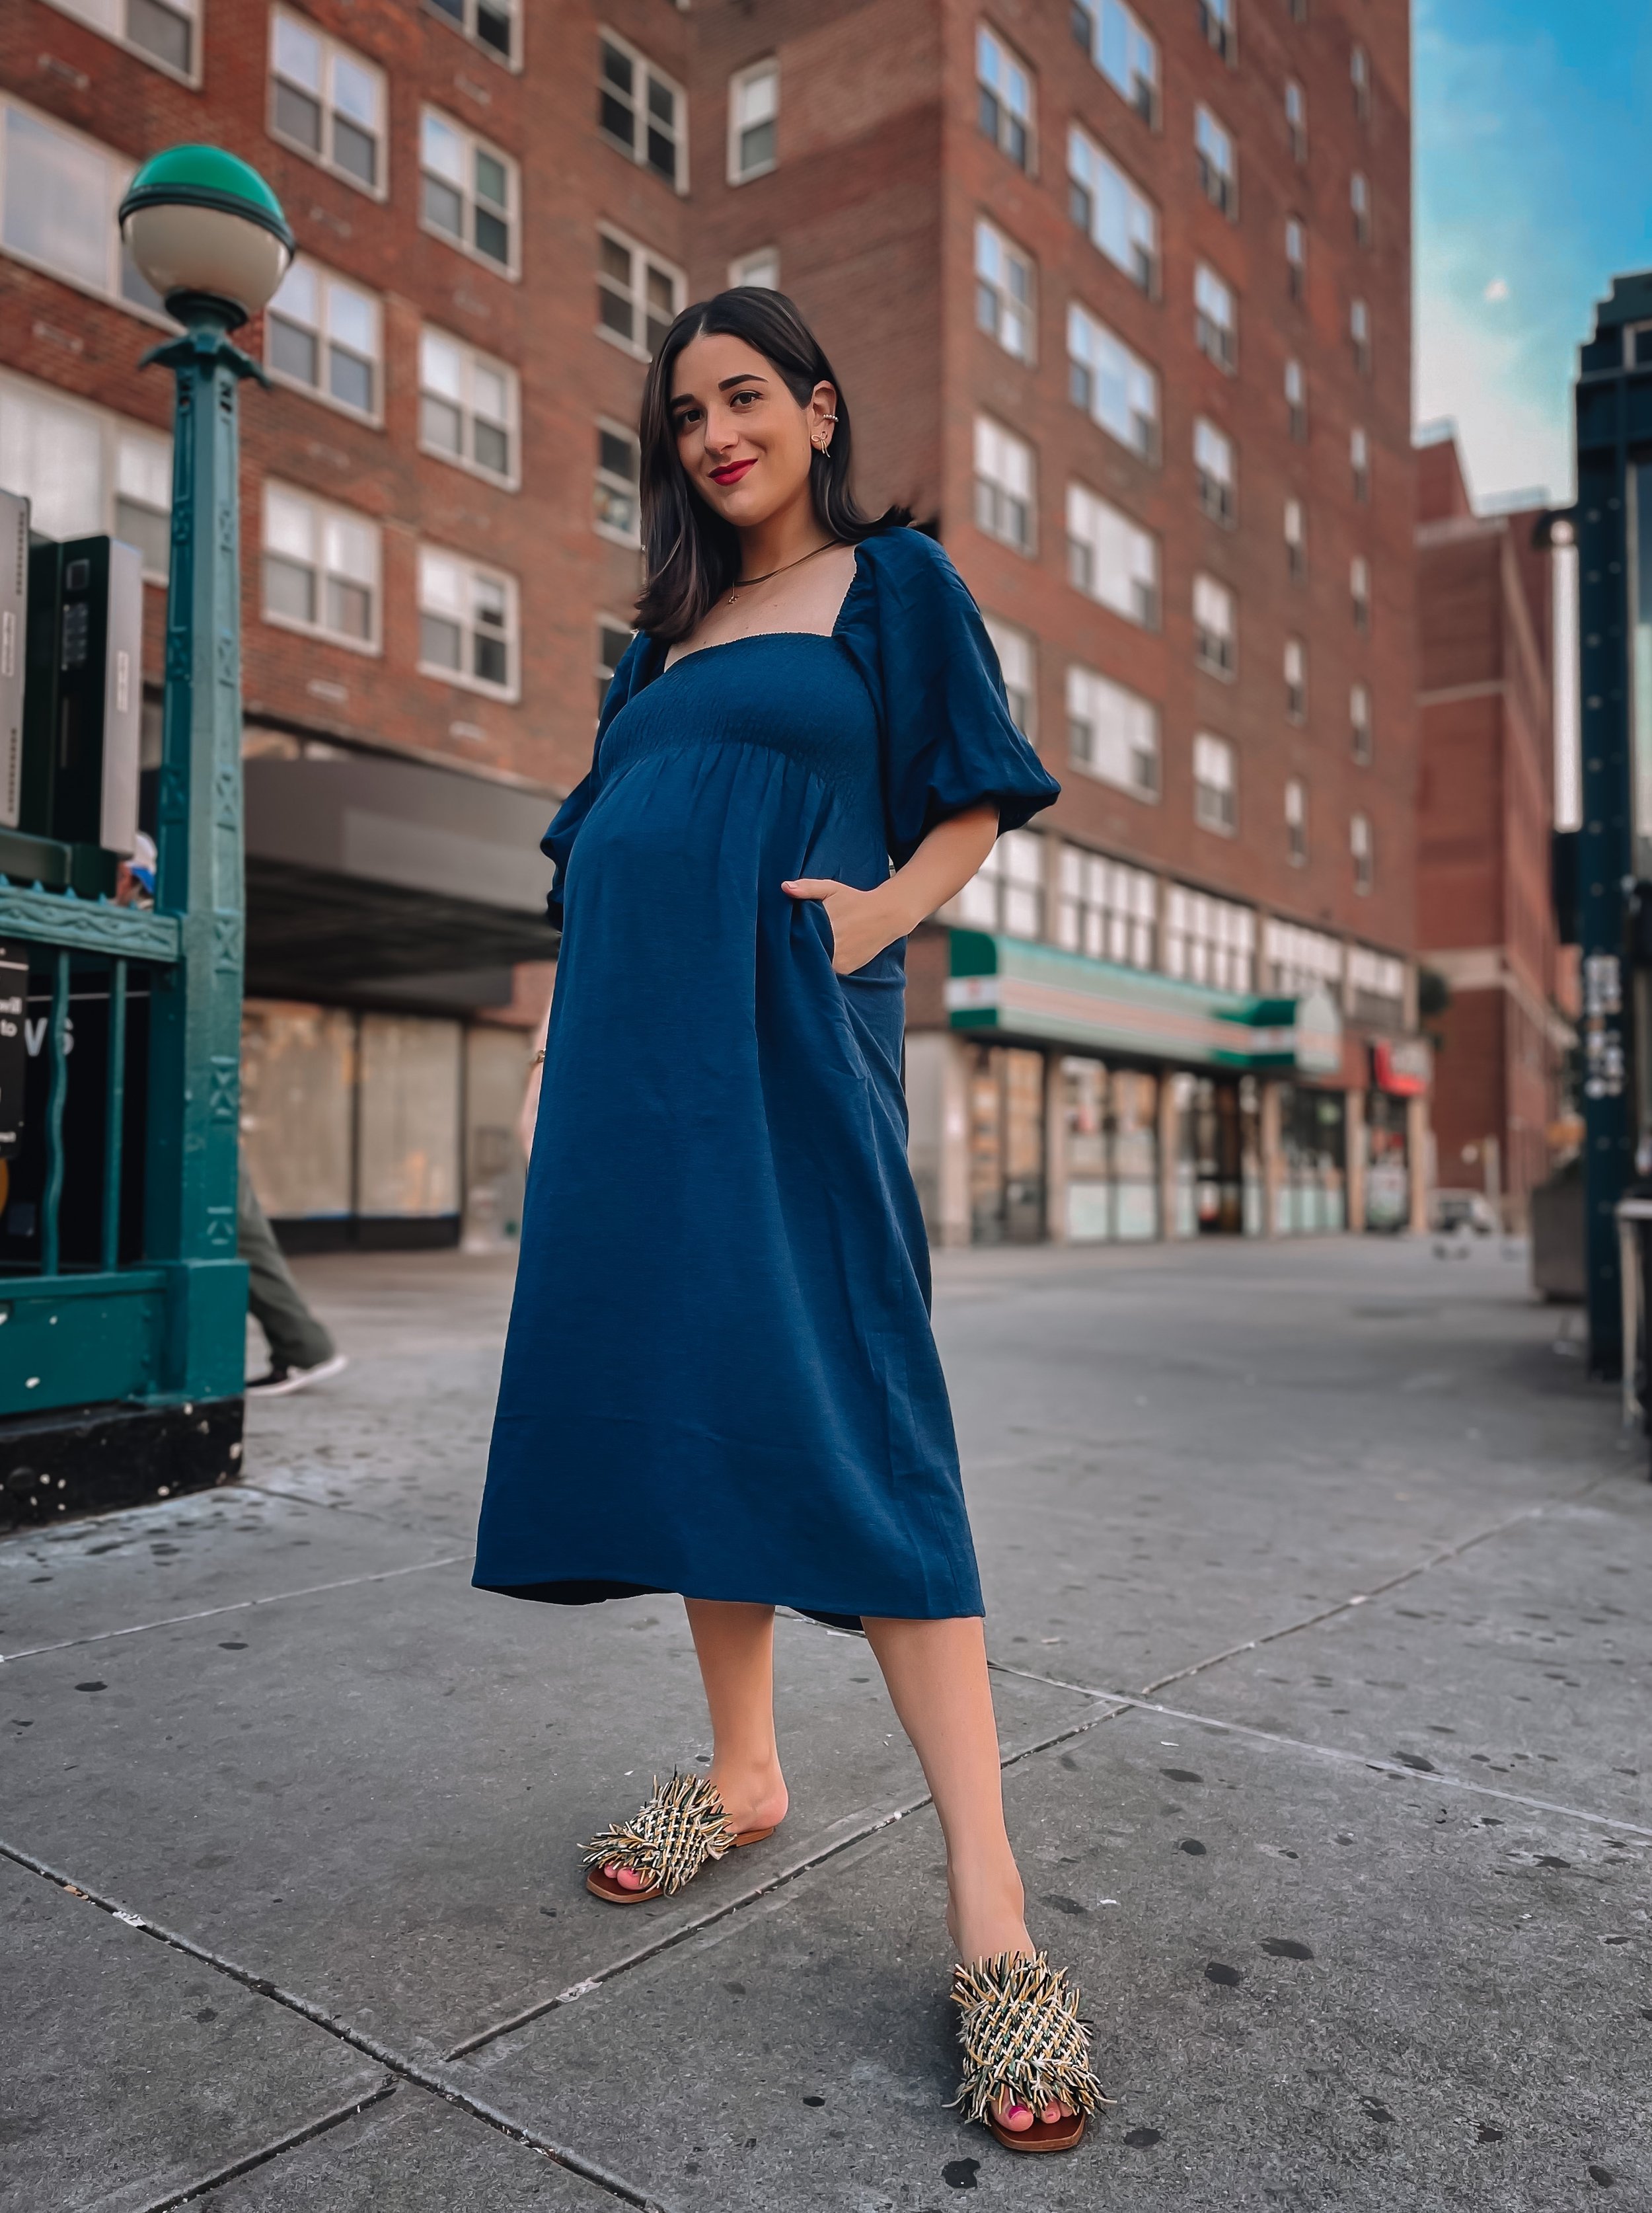 What I Packed In My Hospital Bag Esther Santer NYC Street Style Blogger Pregnancy Fashion Bump Style IVF Sucess Pregnancy Tips Advice Labor and Delivery What To Pack Bring Suitcase Minimal Need Comfort Frida Mom Expecting Baby Buy Toiletries Maternity.JPG